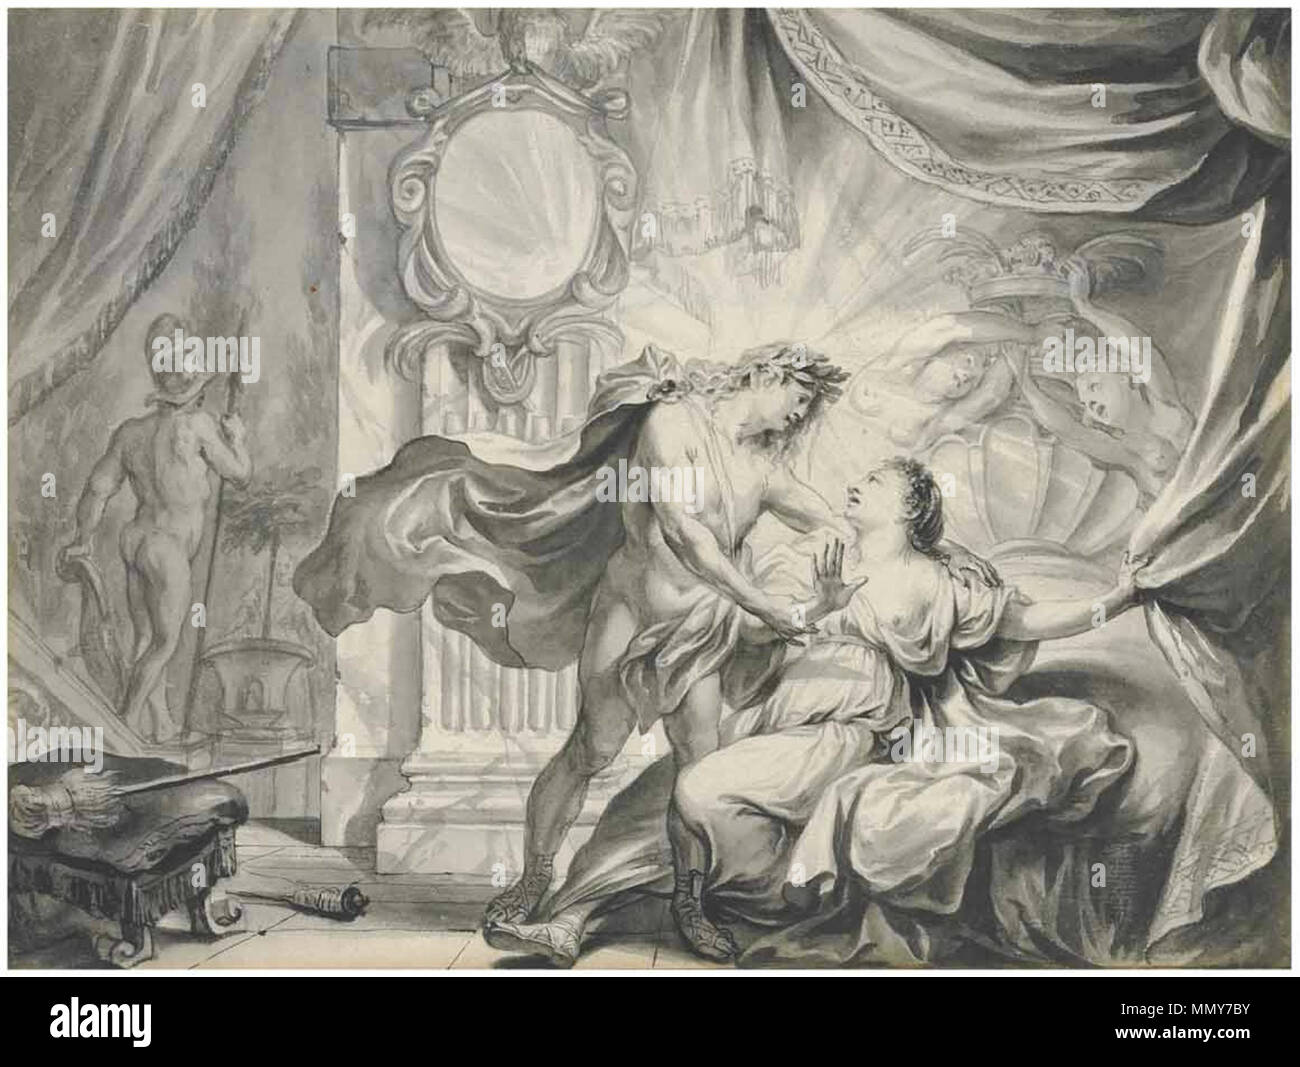 English: Illustrations to the Metamorphoses of Ovid, Apollo seducing Leucothoe . between 1664 and 1700. Godfried Maes - Illustrations to the Metamorphoses of Ovid, Apollo seducing Leucothoe Stock Photo